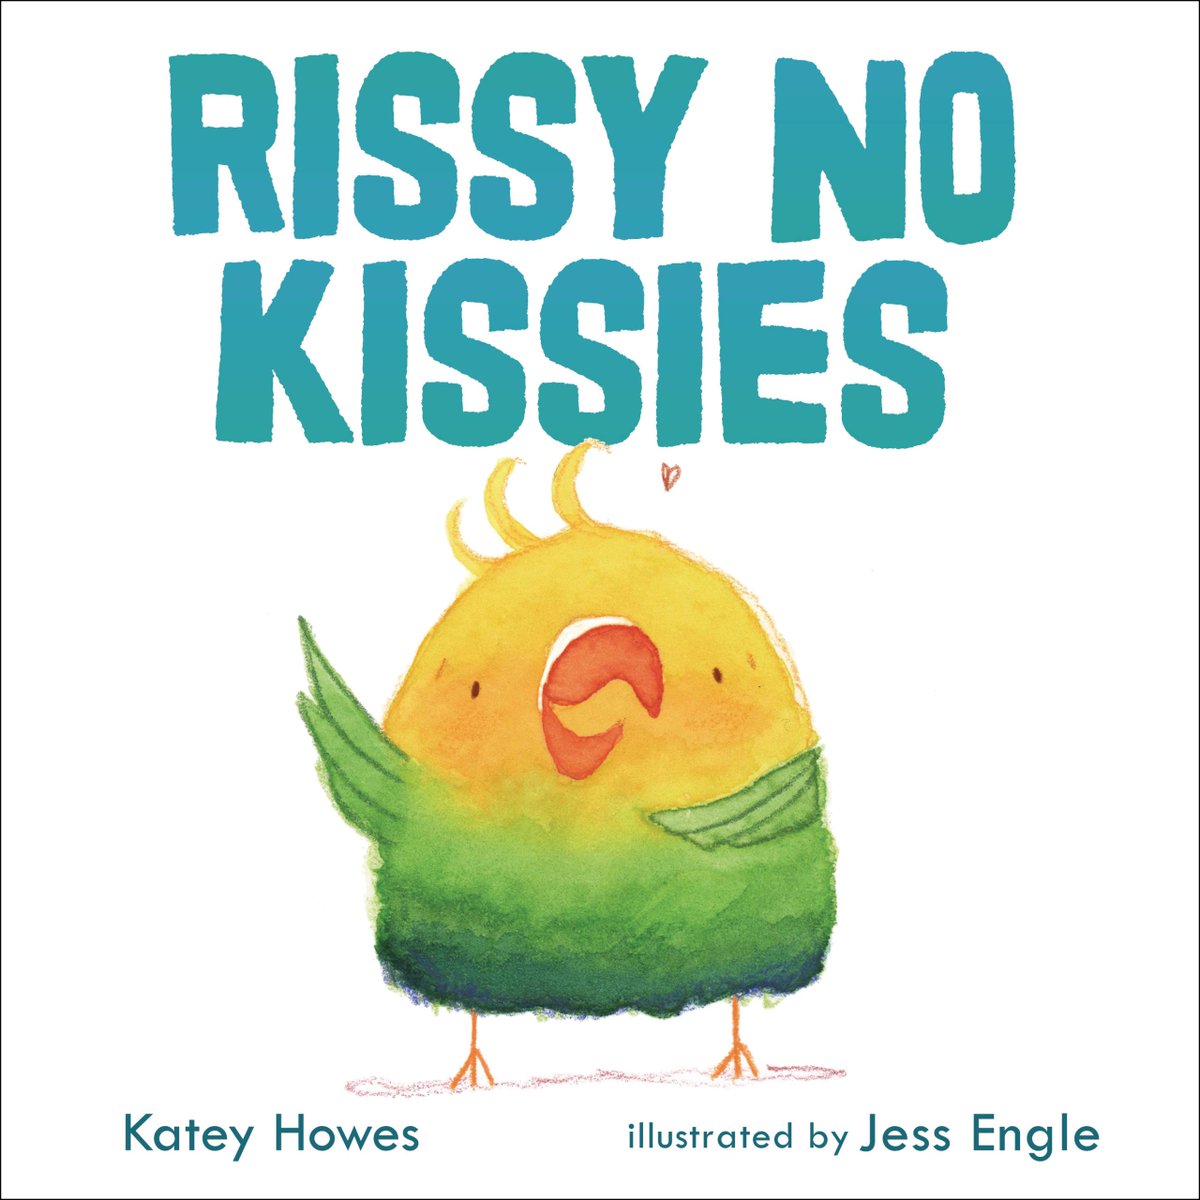 DON'T HUG DOUG (by  @CarrieFinison and  #DanielWiseman, 1/26/21 from  @putnambooks) and RISSY NO KISSIES (by  @Kateywrites and  @wasabipear, out 3/2/21 from  @LernerBooks/ Carolrhoda) would make a great unit on consent in elementary classrooms.